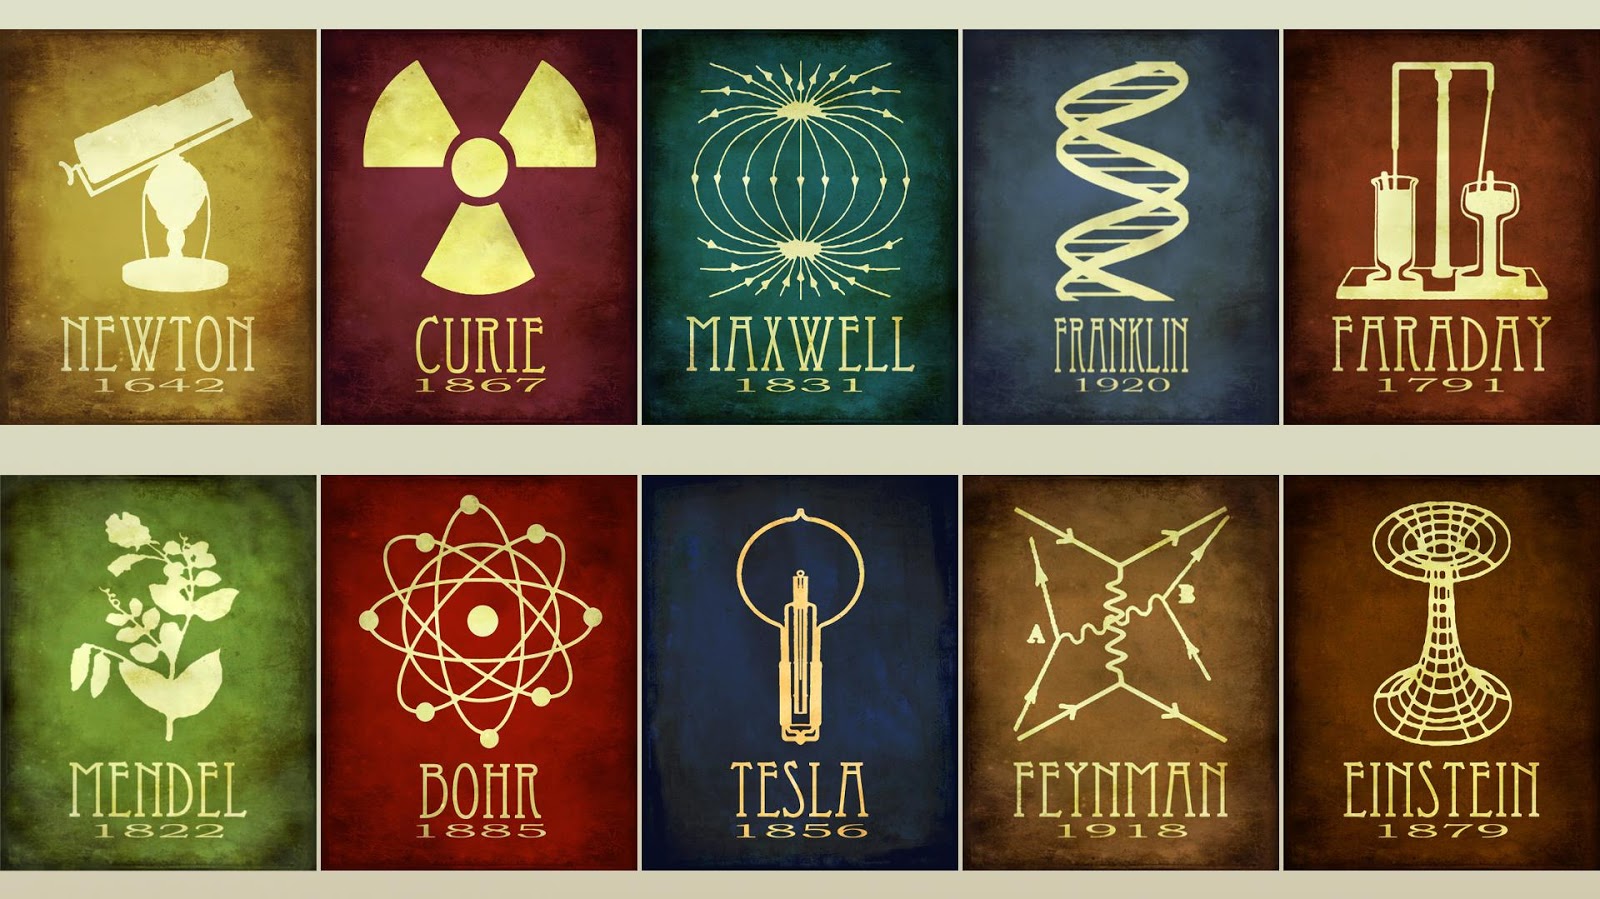 Science Wallpapers